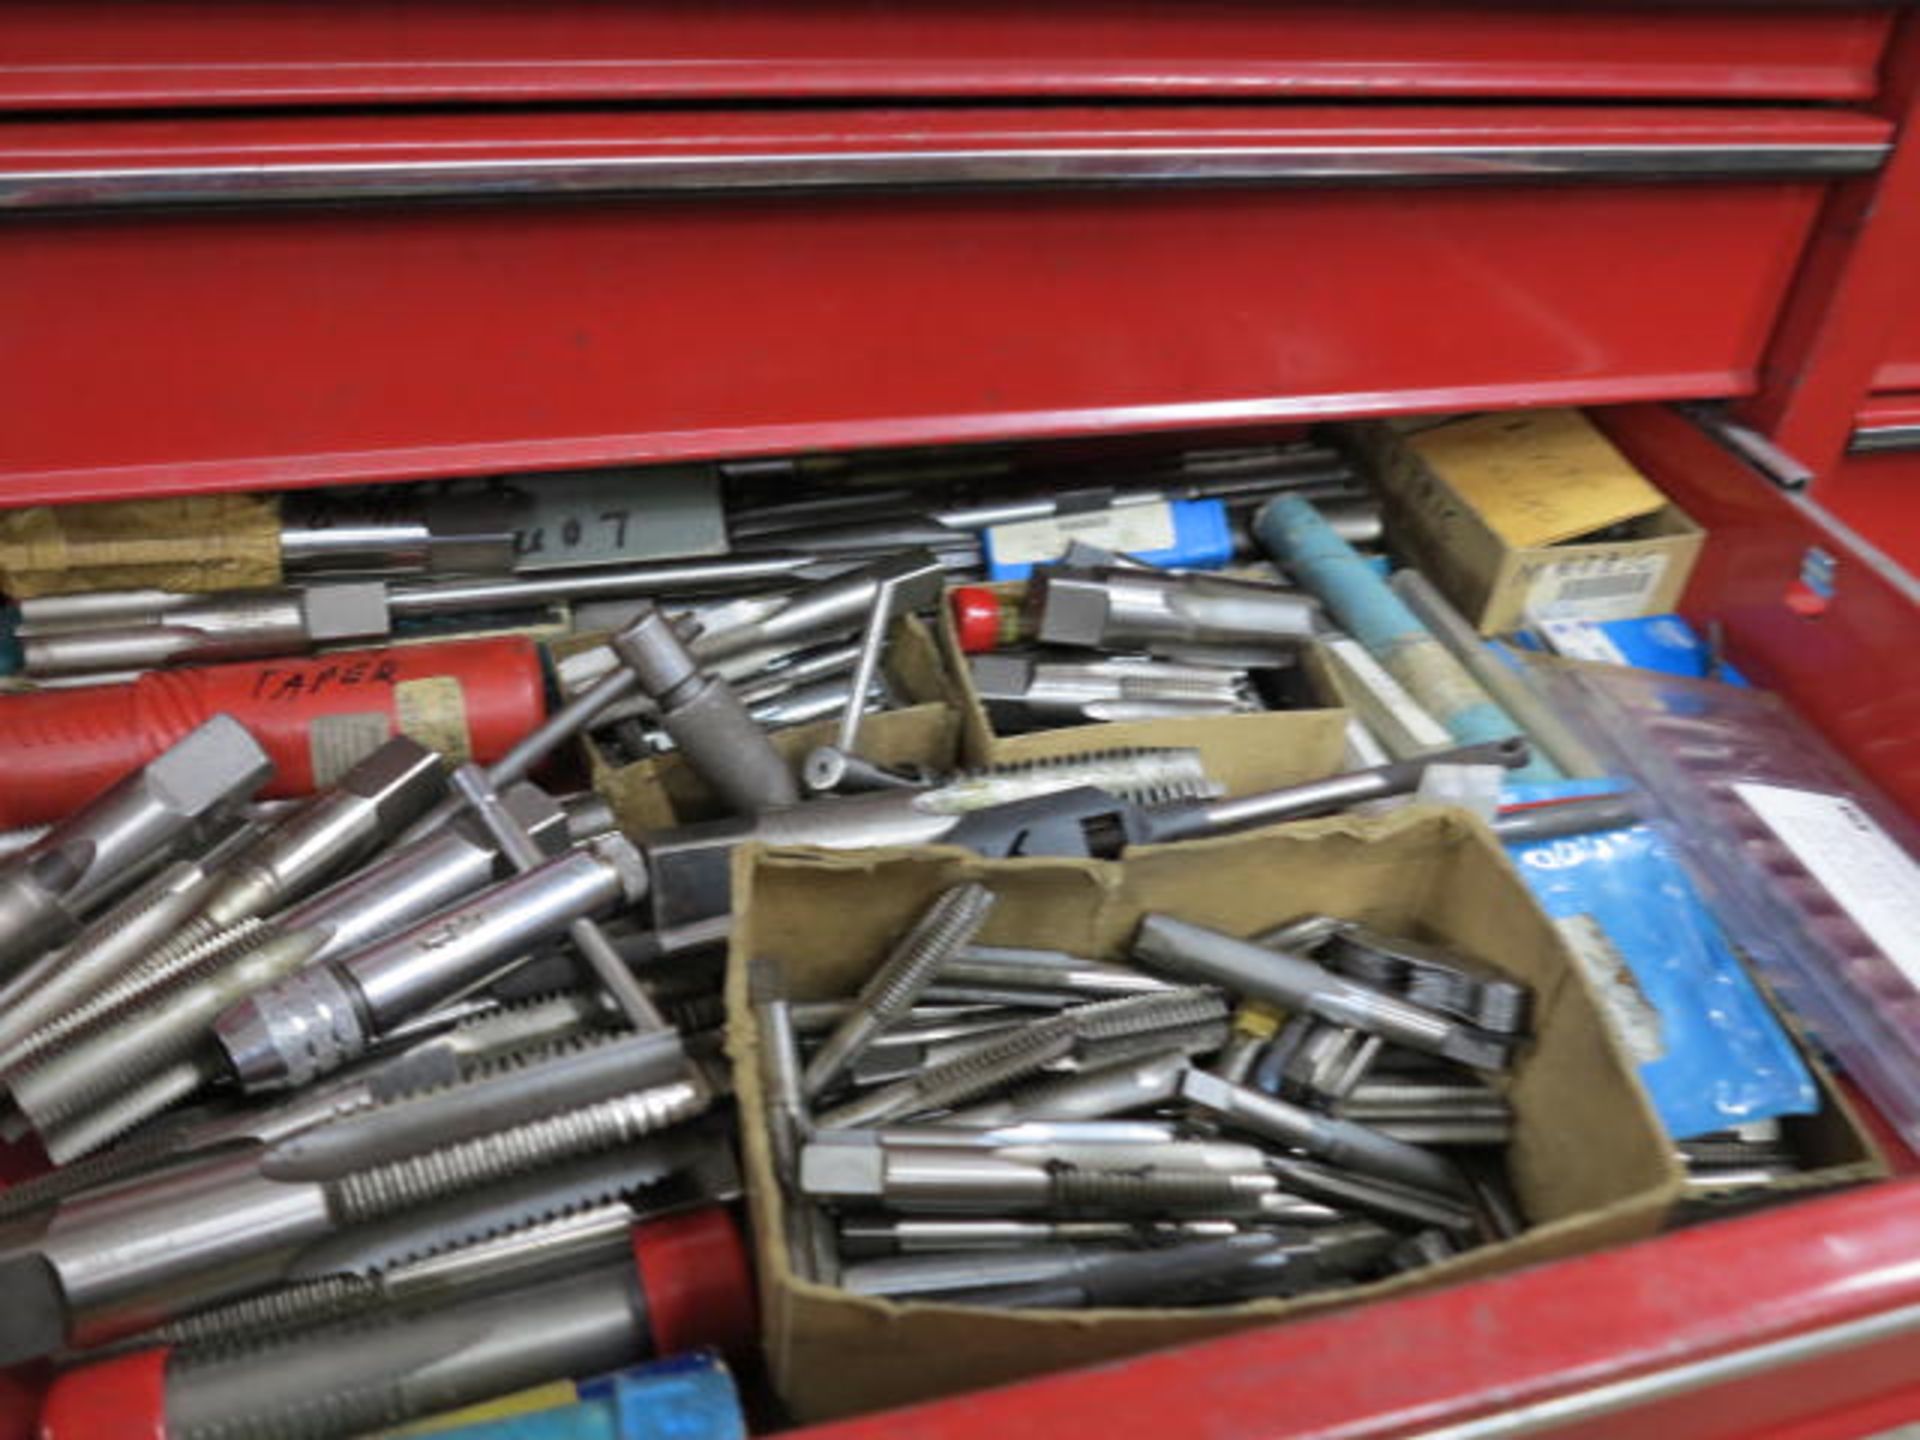 Mechanics Tool Chest Loaded with Tools Located at 93 Macondrey St Cumberland, RI - Image 2 of 6